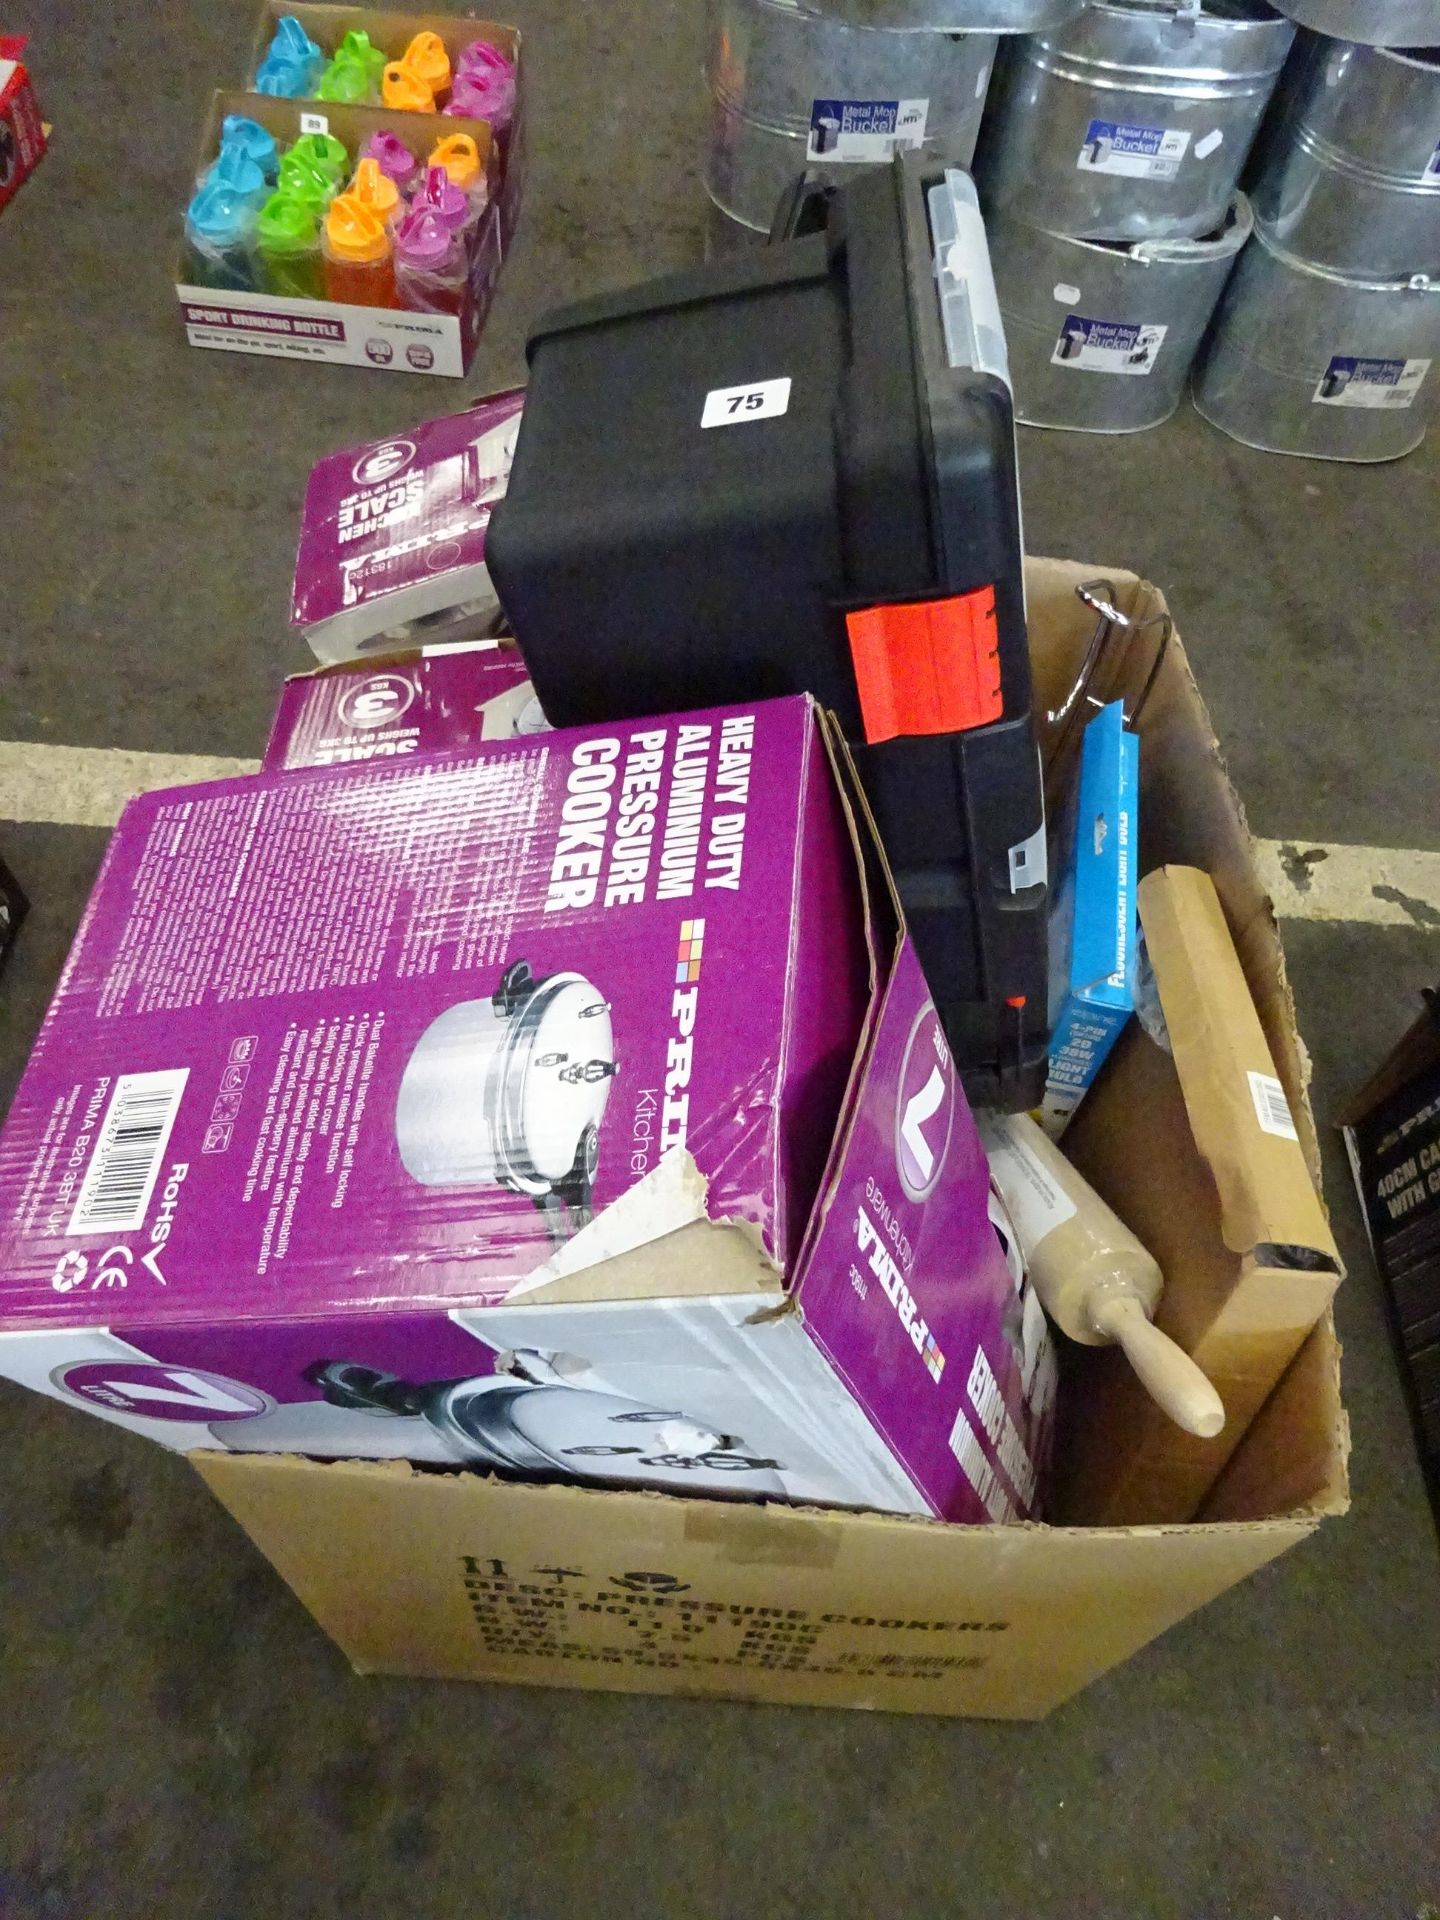 2 TOOL BOXES, 2 KITCHEN SCALES, PRESSURE COOKER, KITCHENWARE & ODDS